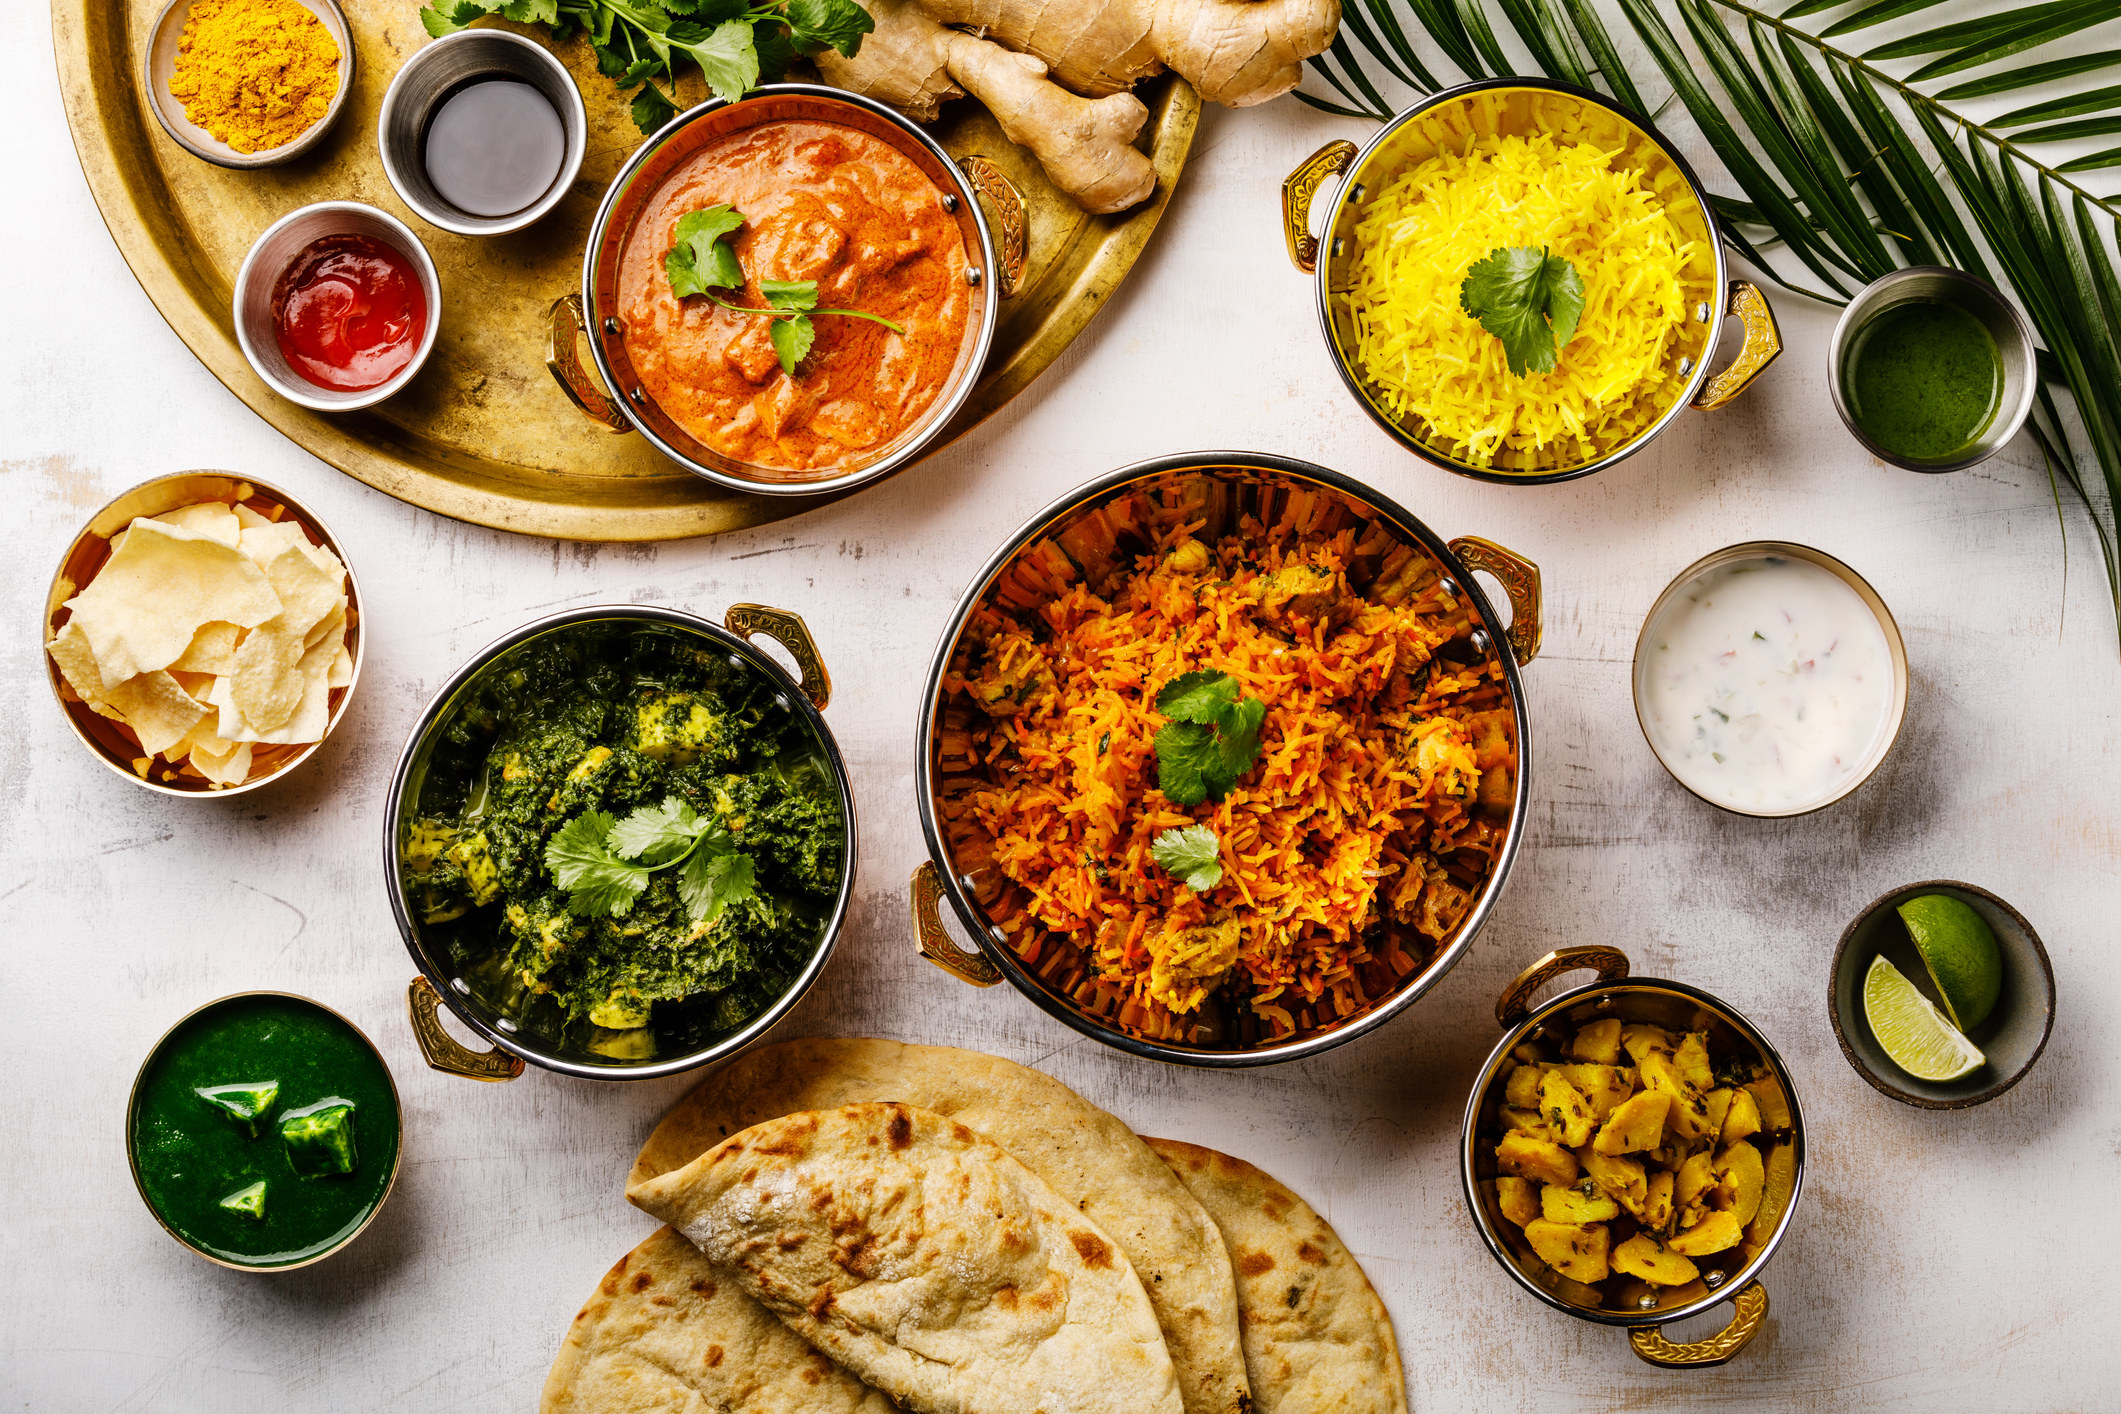 A spread of Indian food.